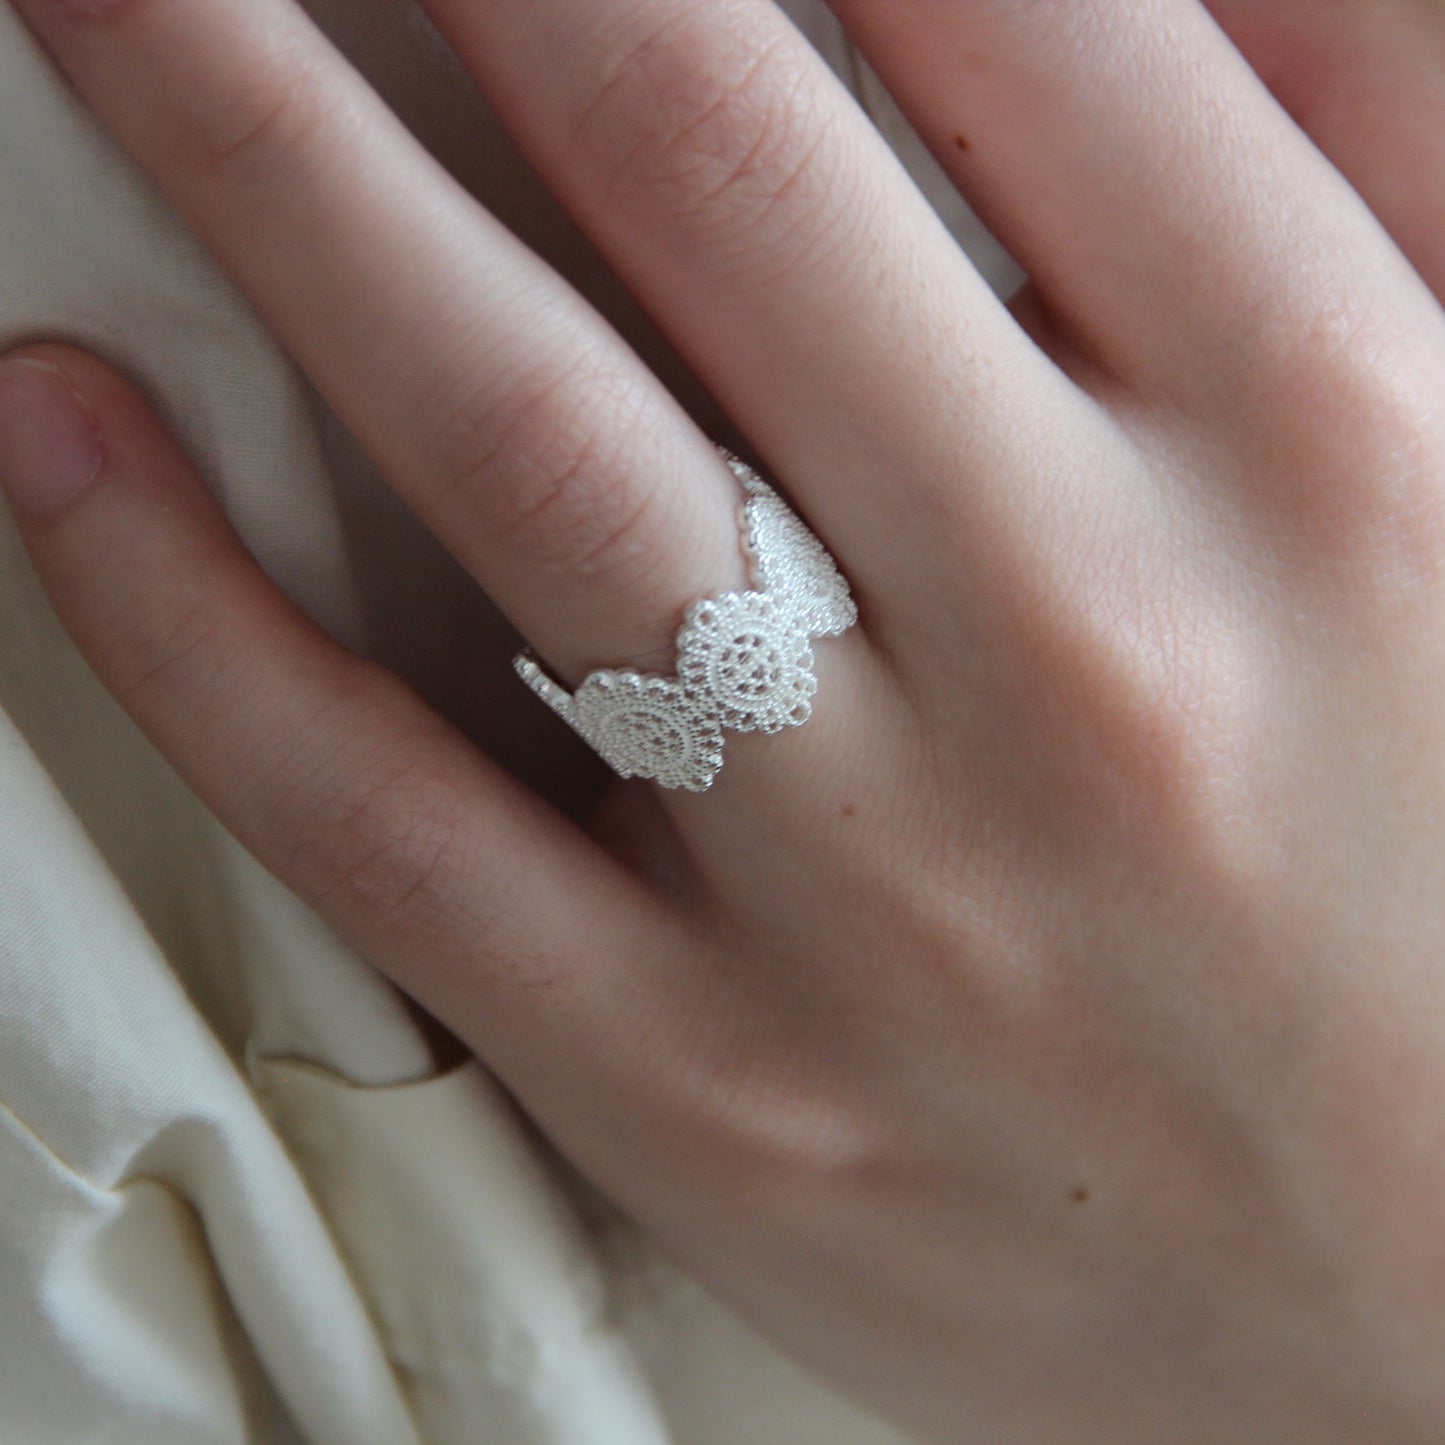 925 Silver Filigree Ring, Vintage Lace Ring, Unique Wide Band Rings, Lace Ring, Sterling Silver Statement Jewelry Gift for Her